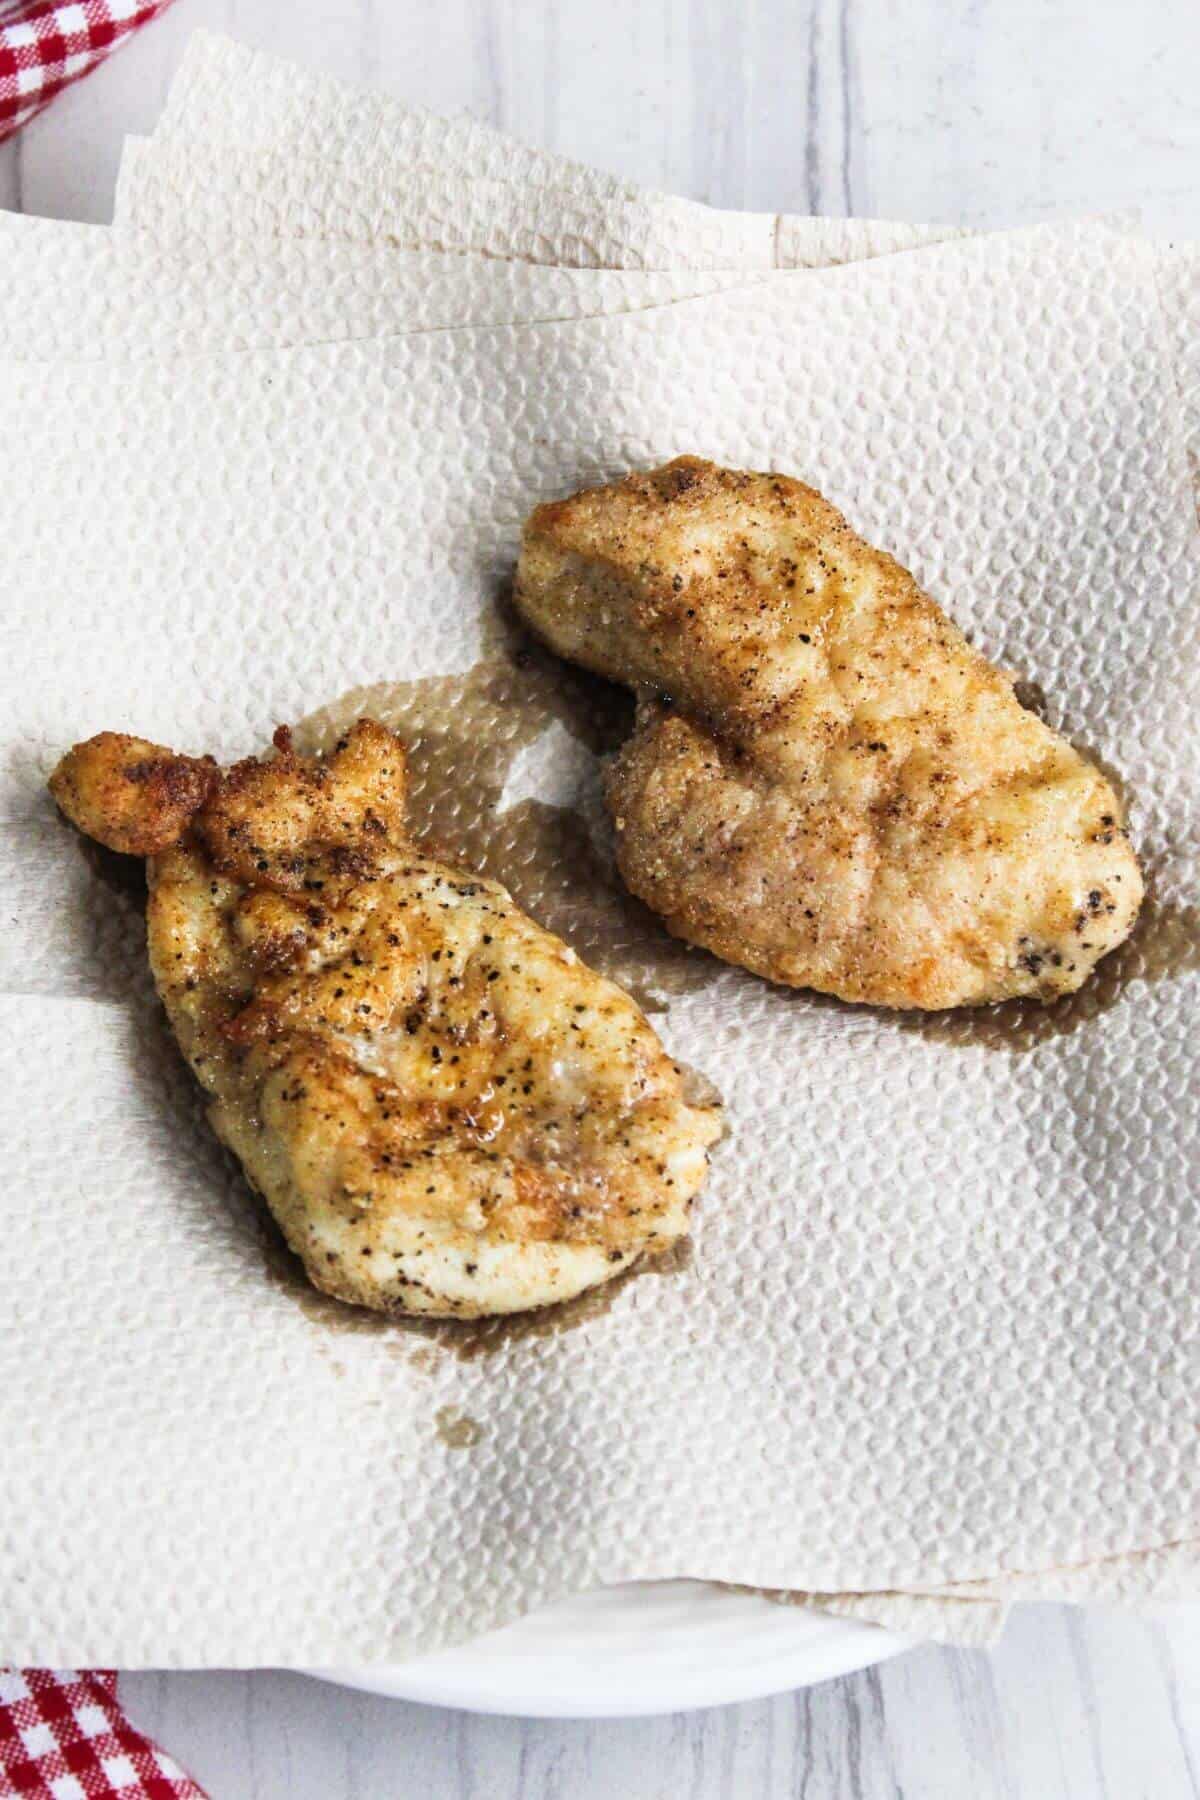 Two fried chicken breasts on a napkin next to a checkered napkin.